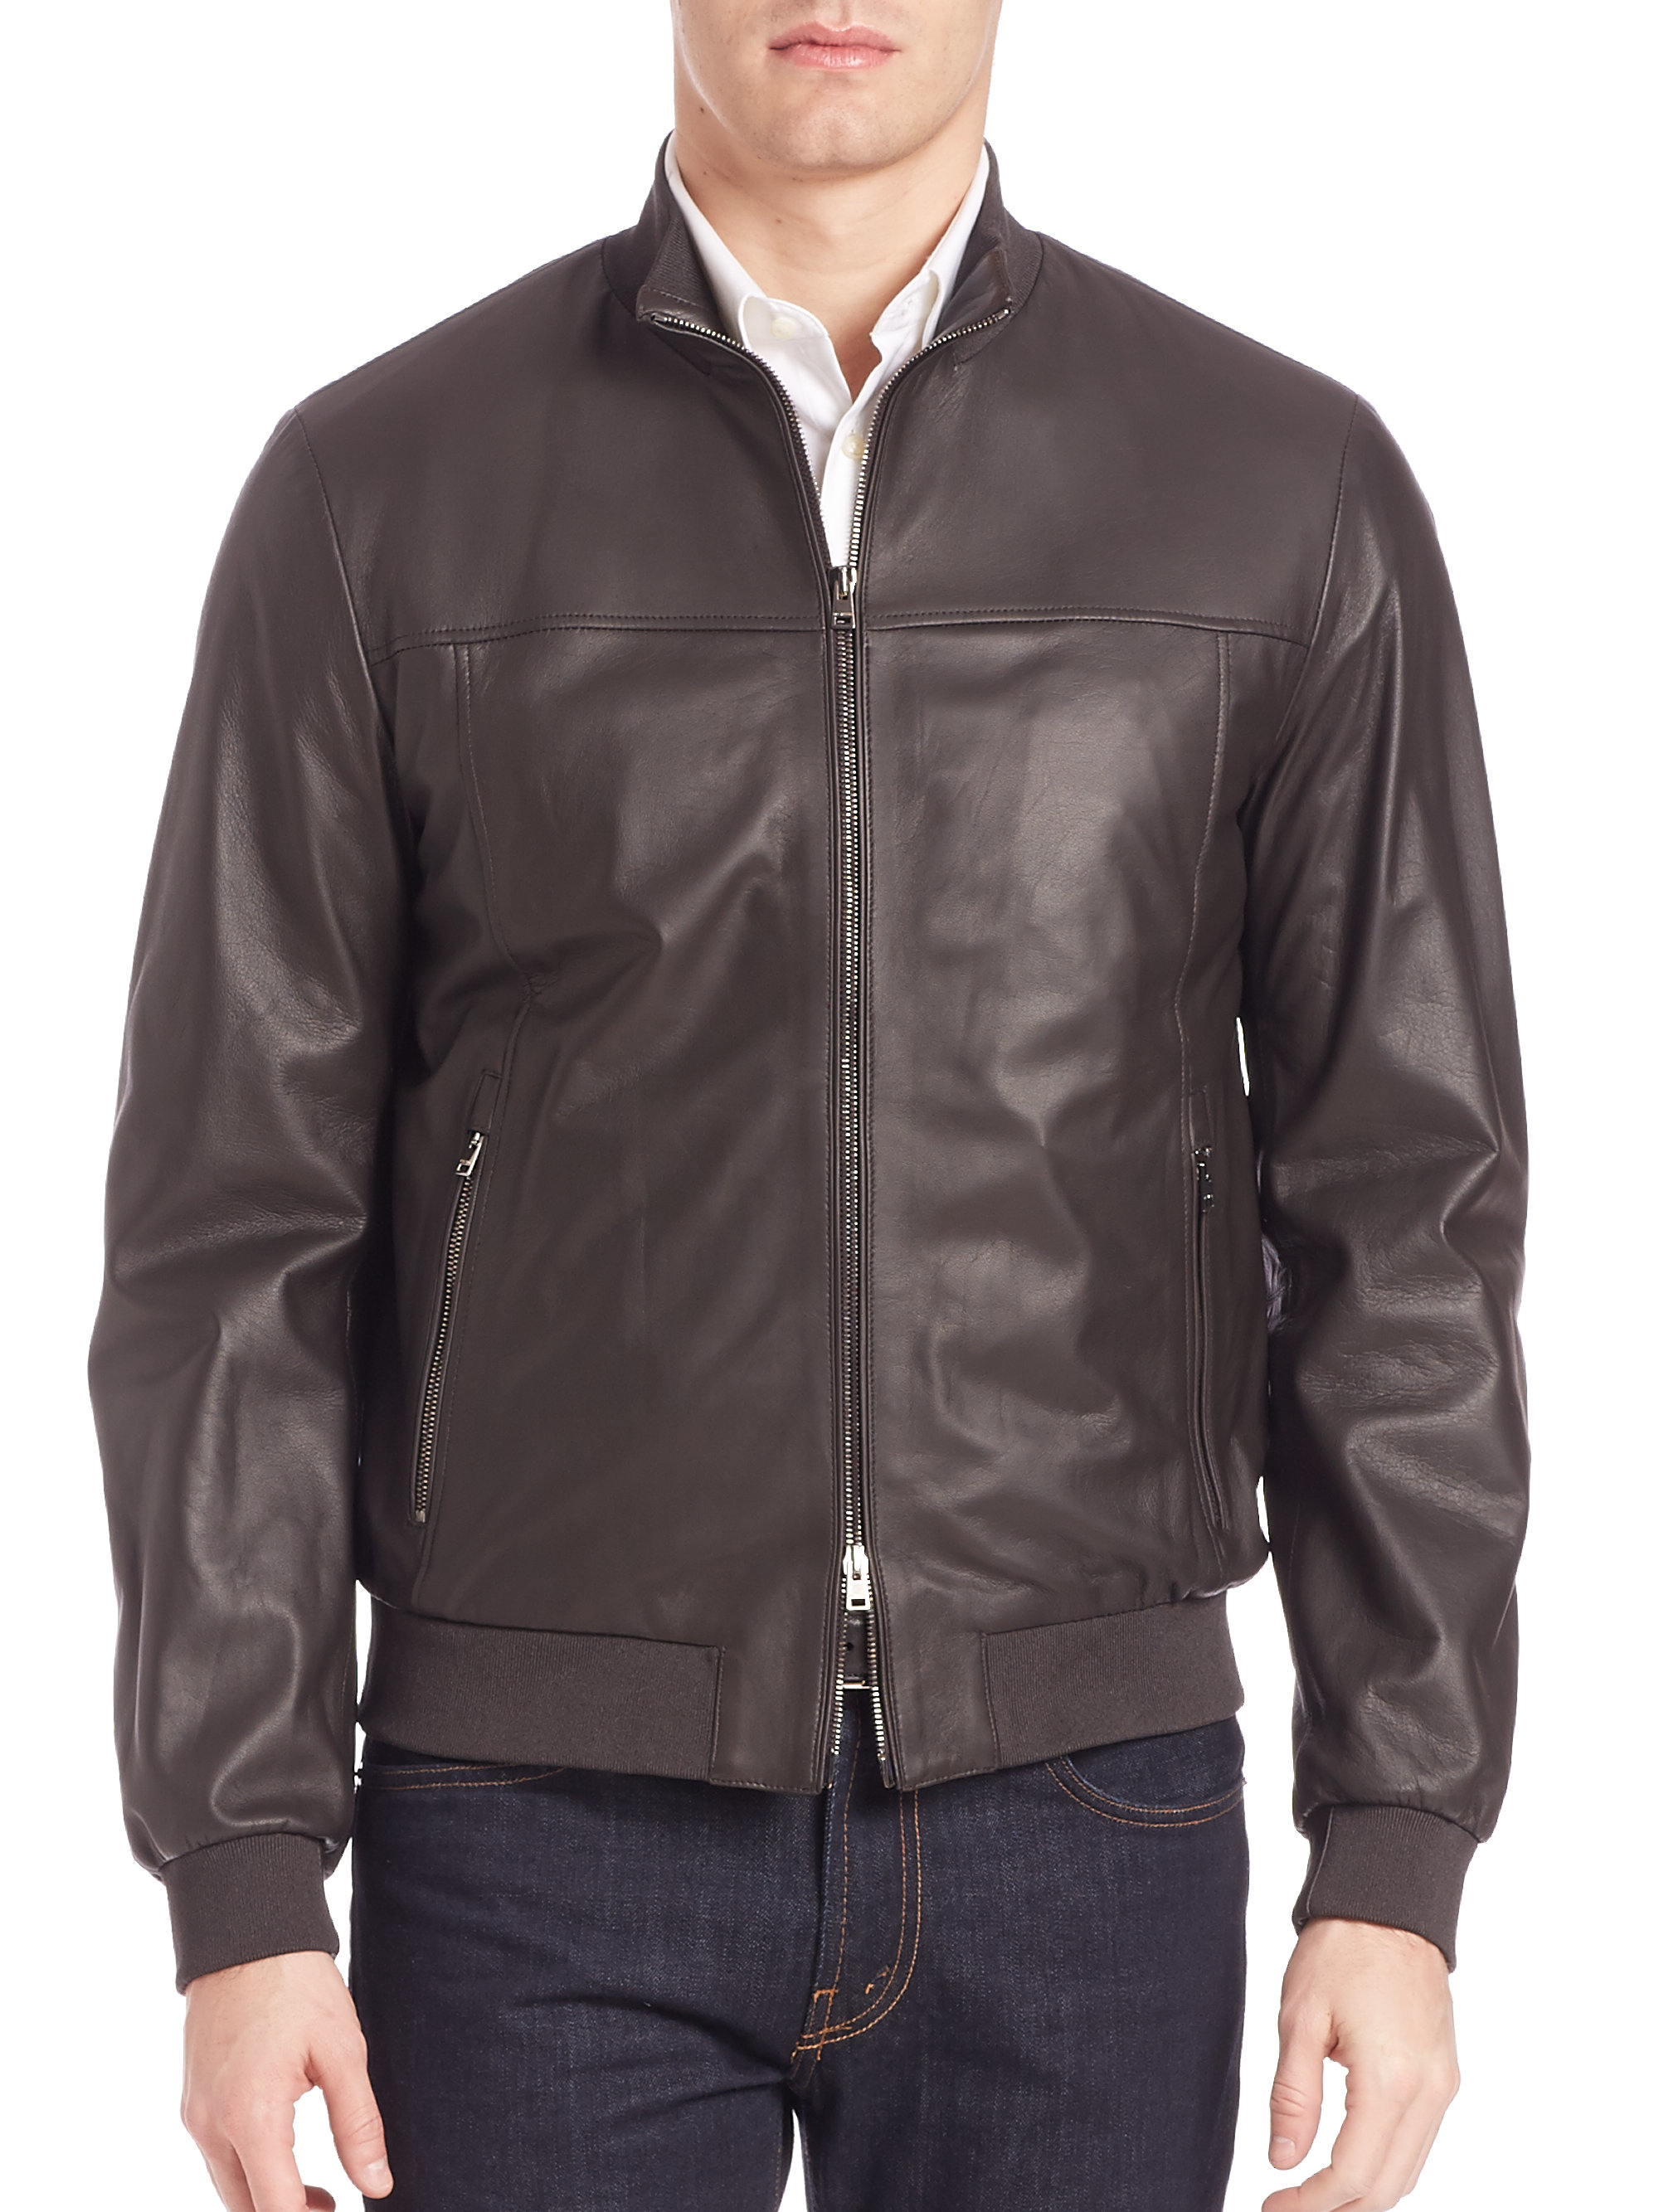 Pal Zileri Leather Jacket in Chocolate (Brown) for Men - Lyst